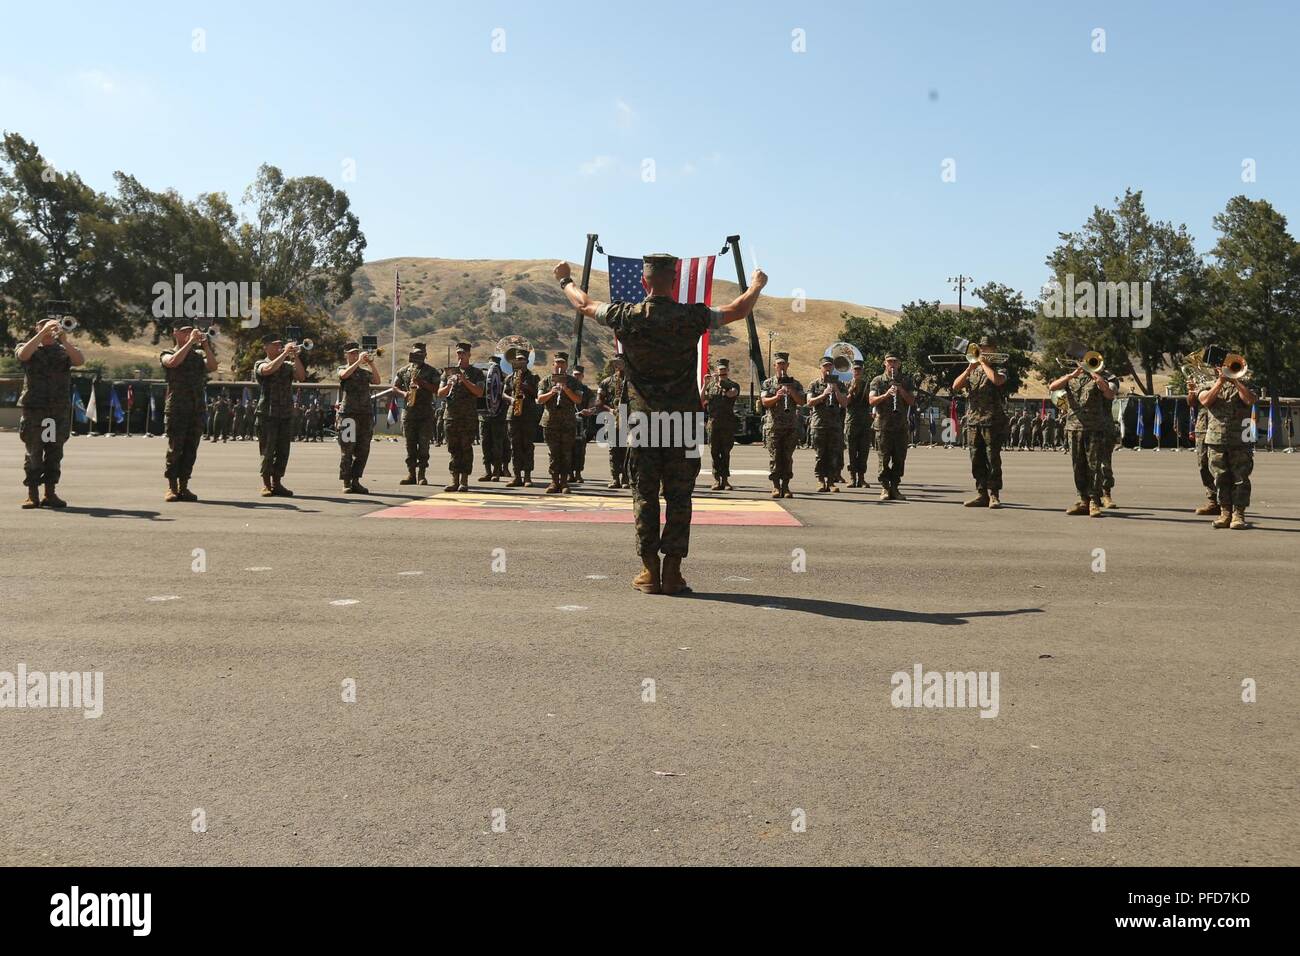 The U.S. Marine Band Camp Pendleton performs during a retirement ceremony at Marine Corps Base Camp Pendleton, Calif., June 7, 2018. The ceremony was held in honor of Chief Warrant Officer 5 David C. Thomas for his 30 years of meritorious service. Stock Photo